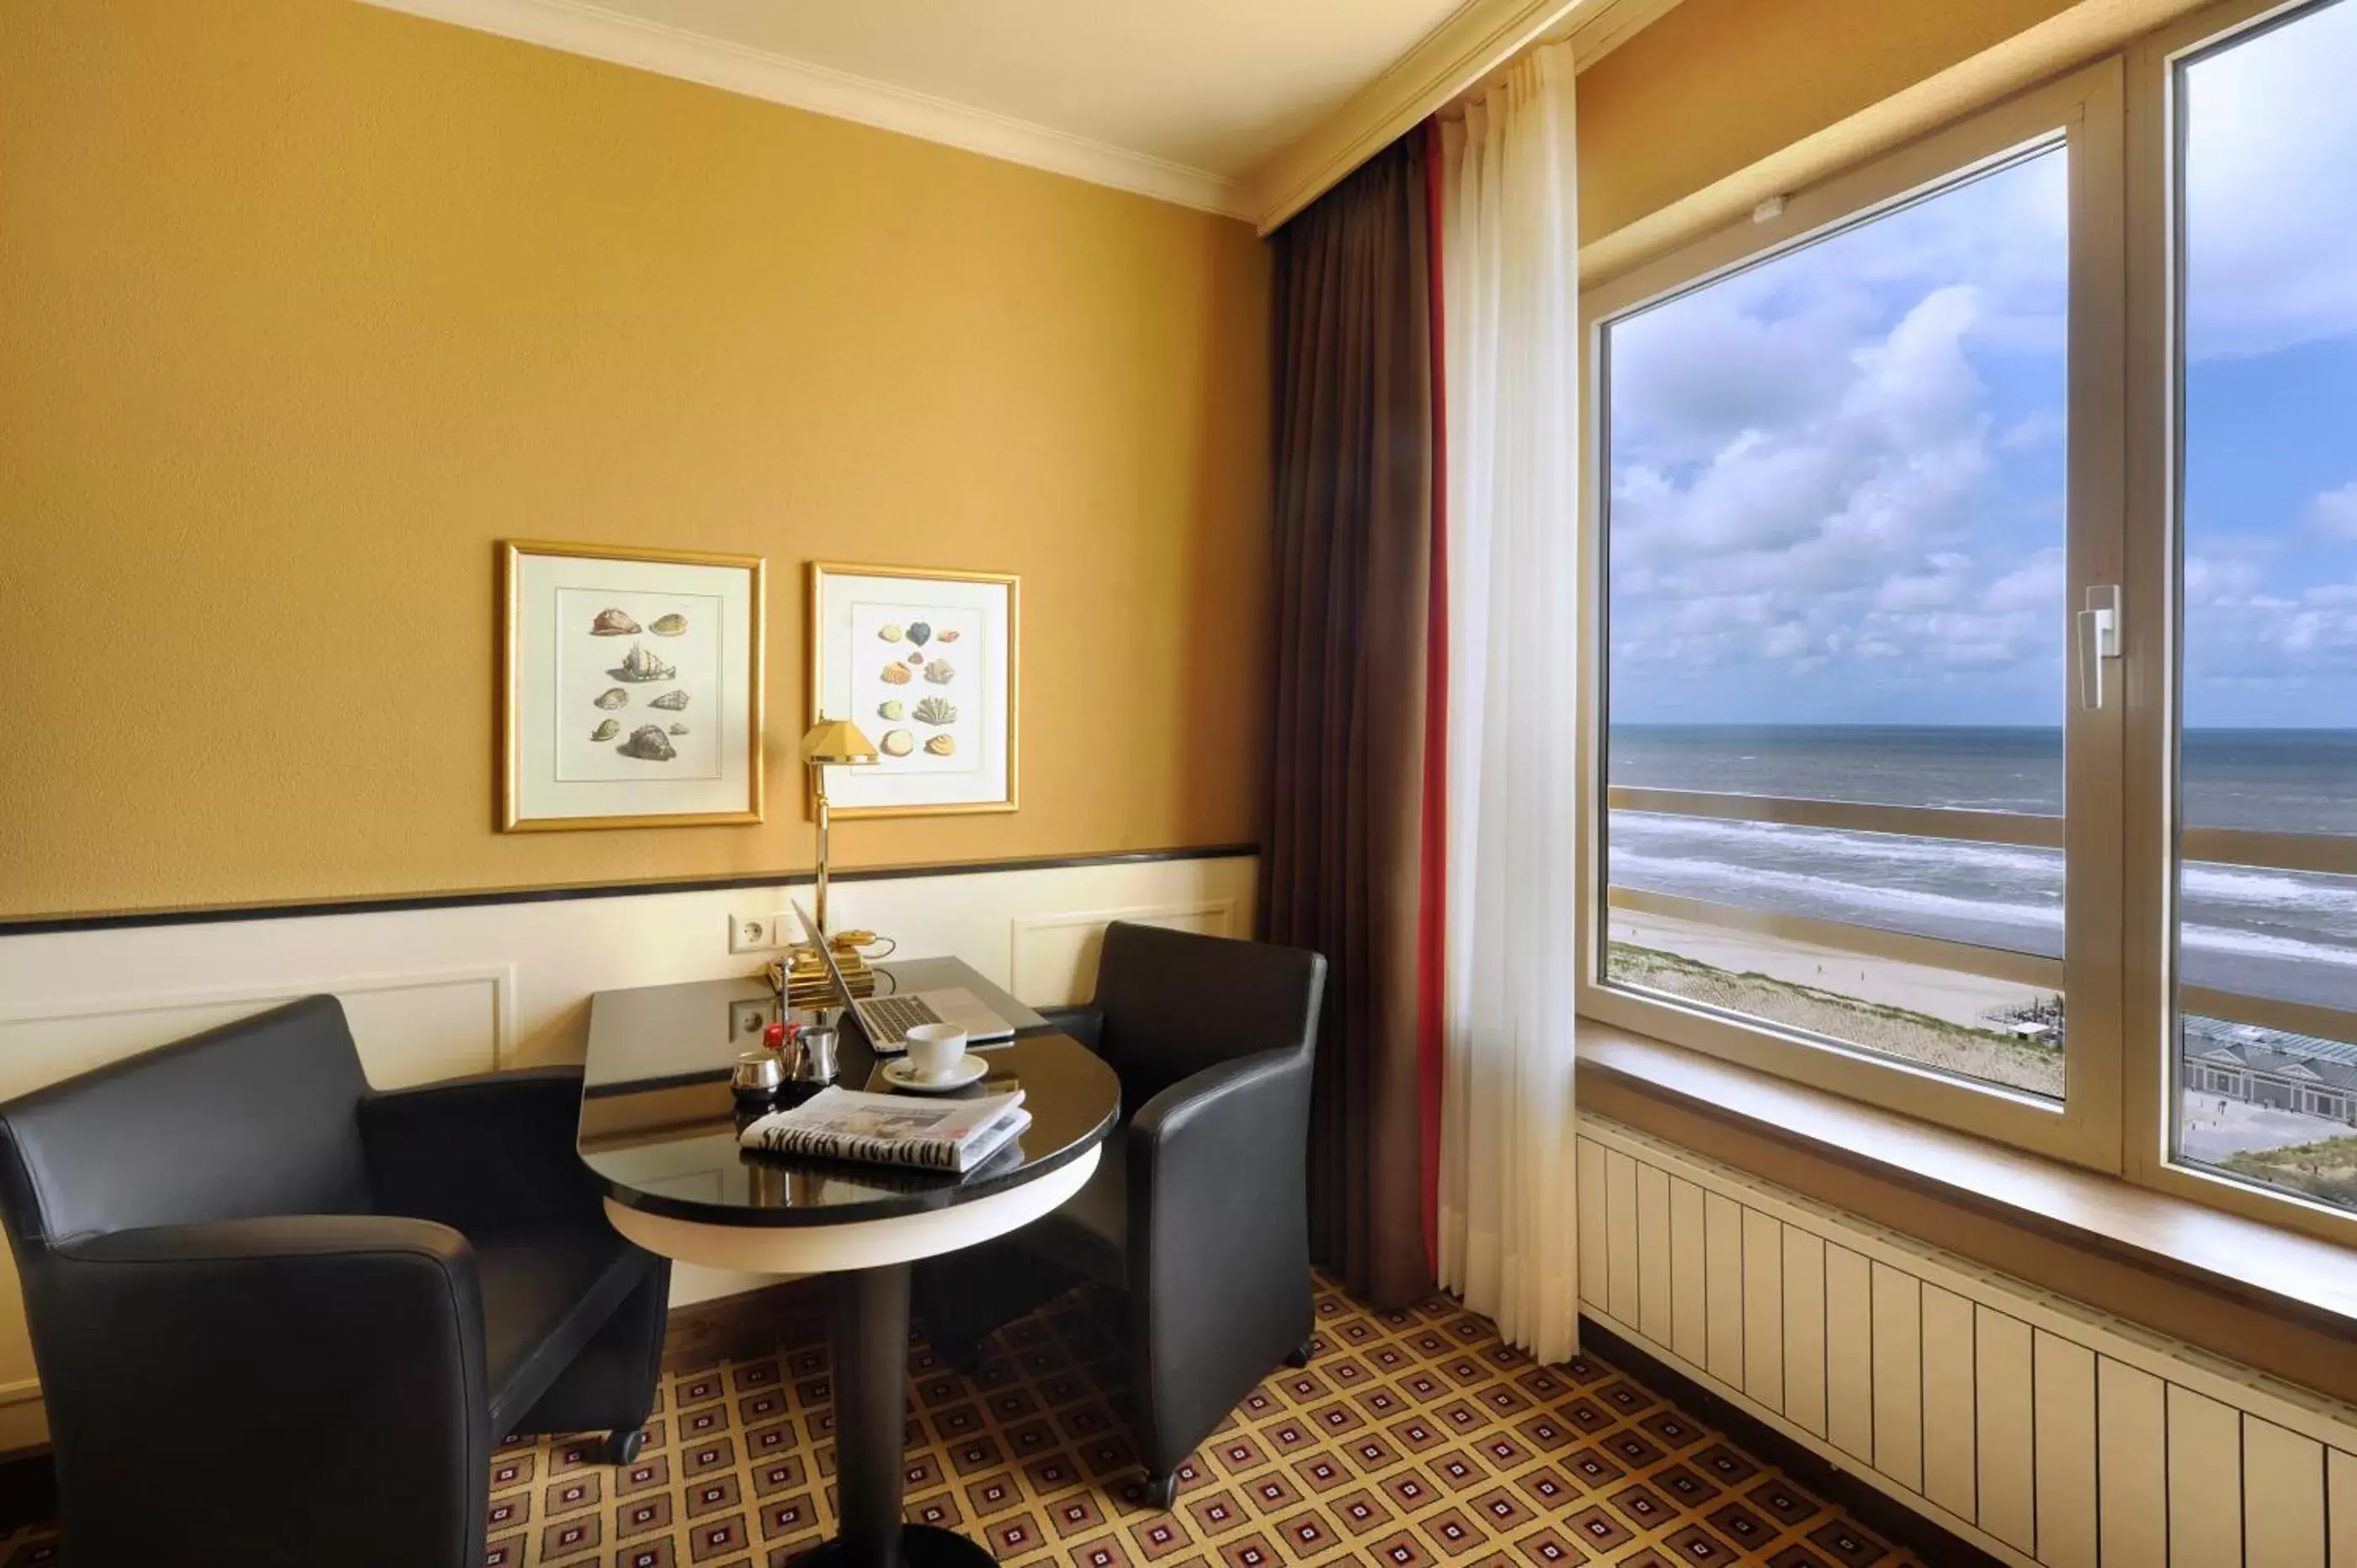 Sea view in Grand Hotel Huis ter Duin